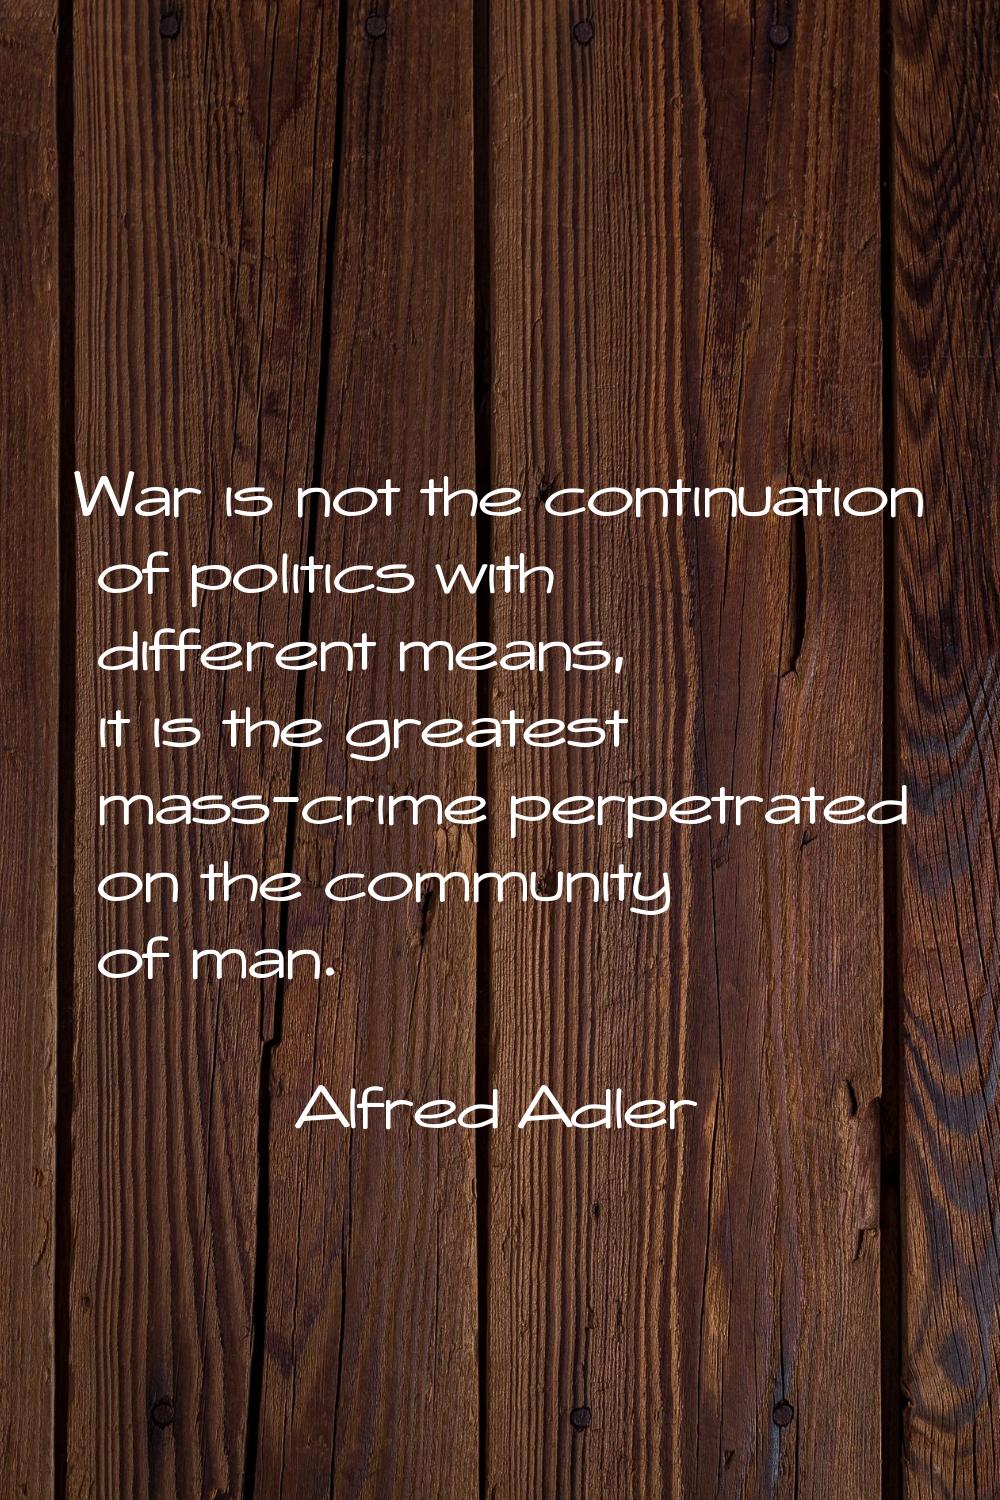 War is not the continuation of politics with different means, it is the greatest mass-crime perpetr